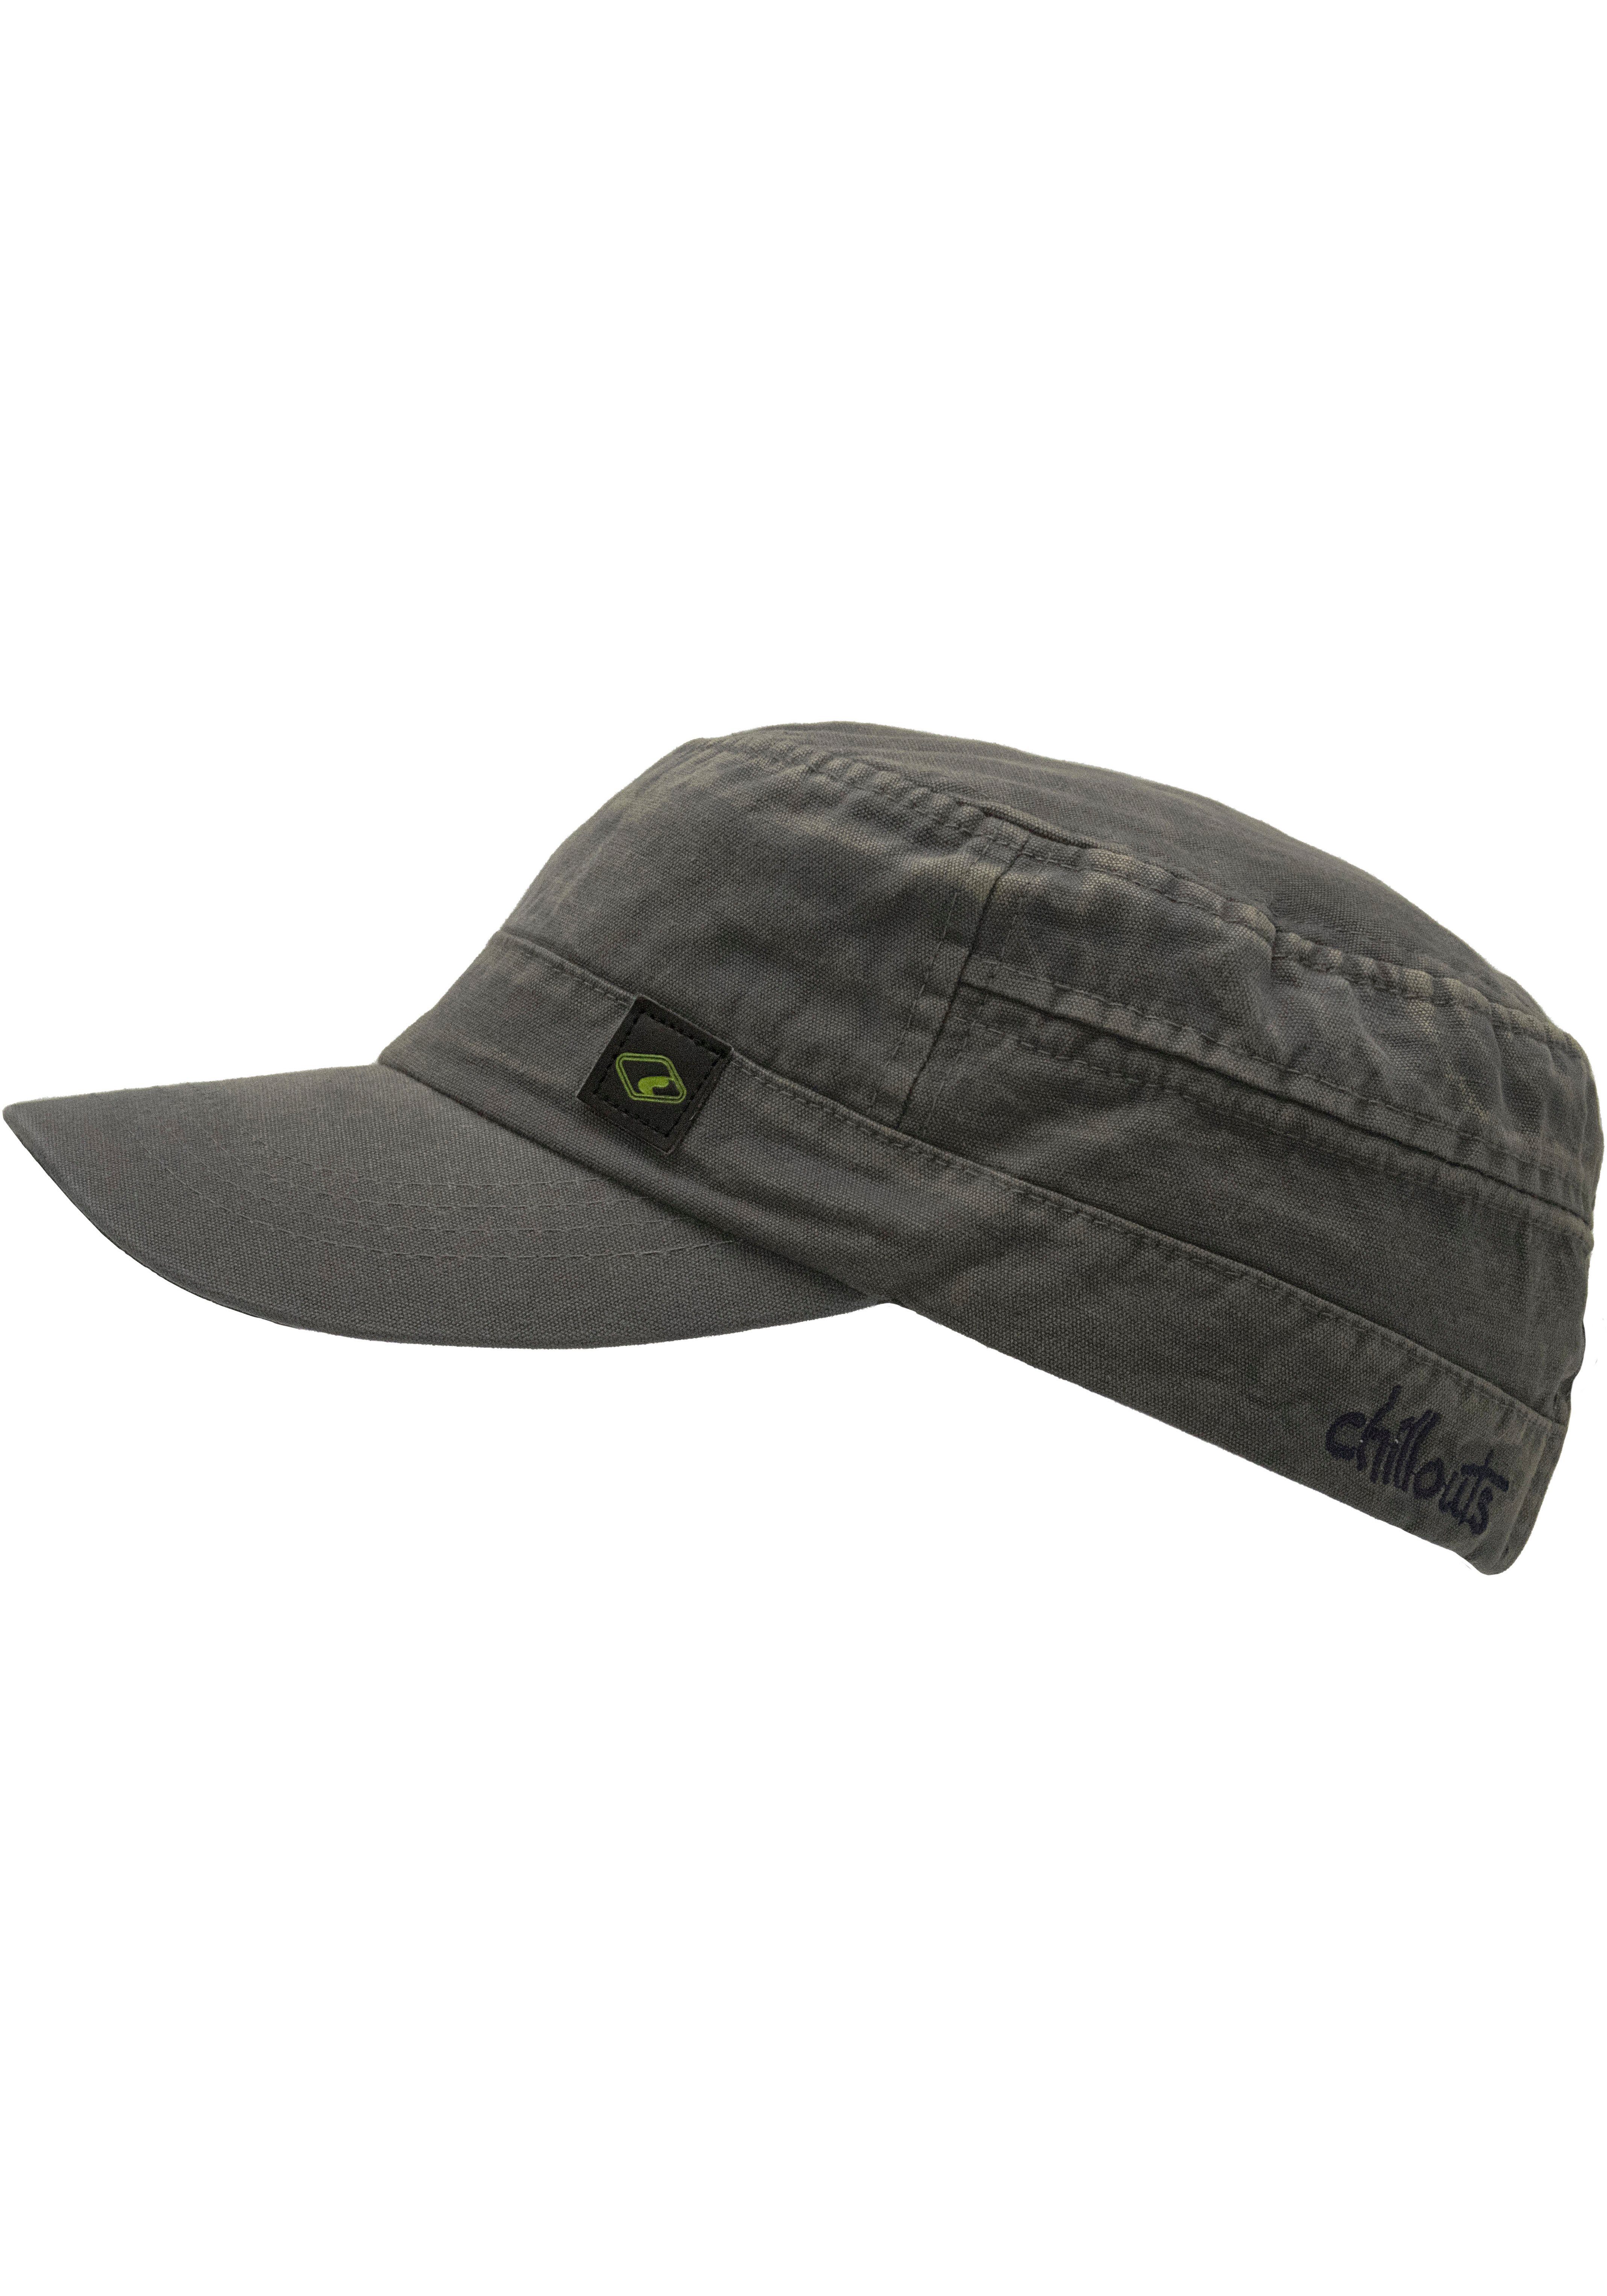 chillouts Army Cap El One grey aus reiner Size Baumwolle, atmungsaktiv, Paso Hat washed